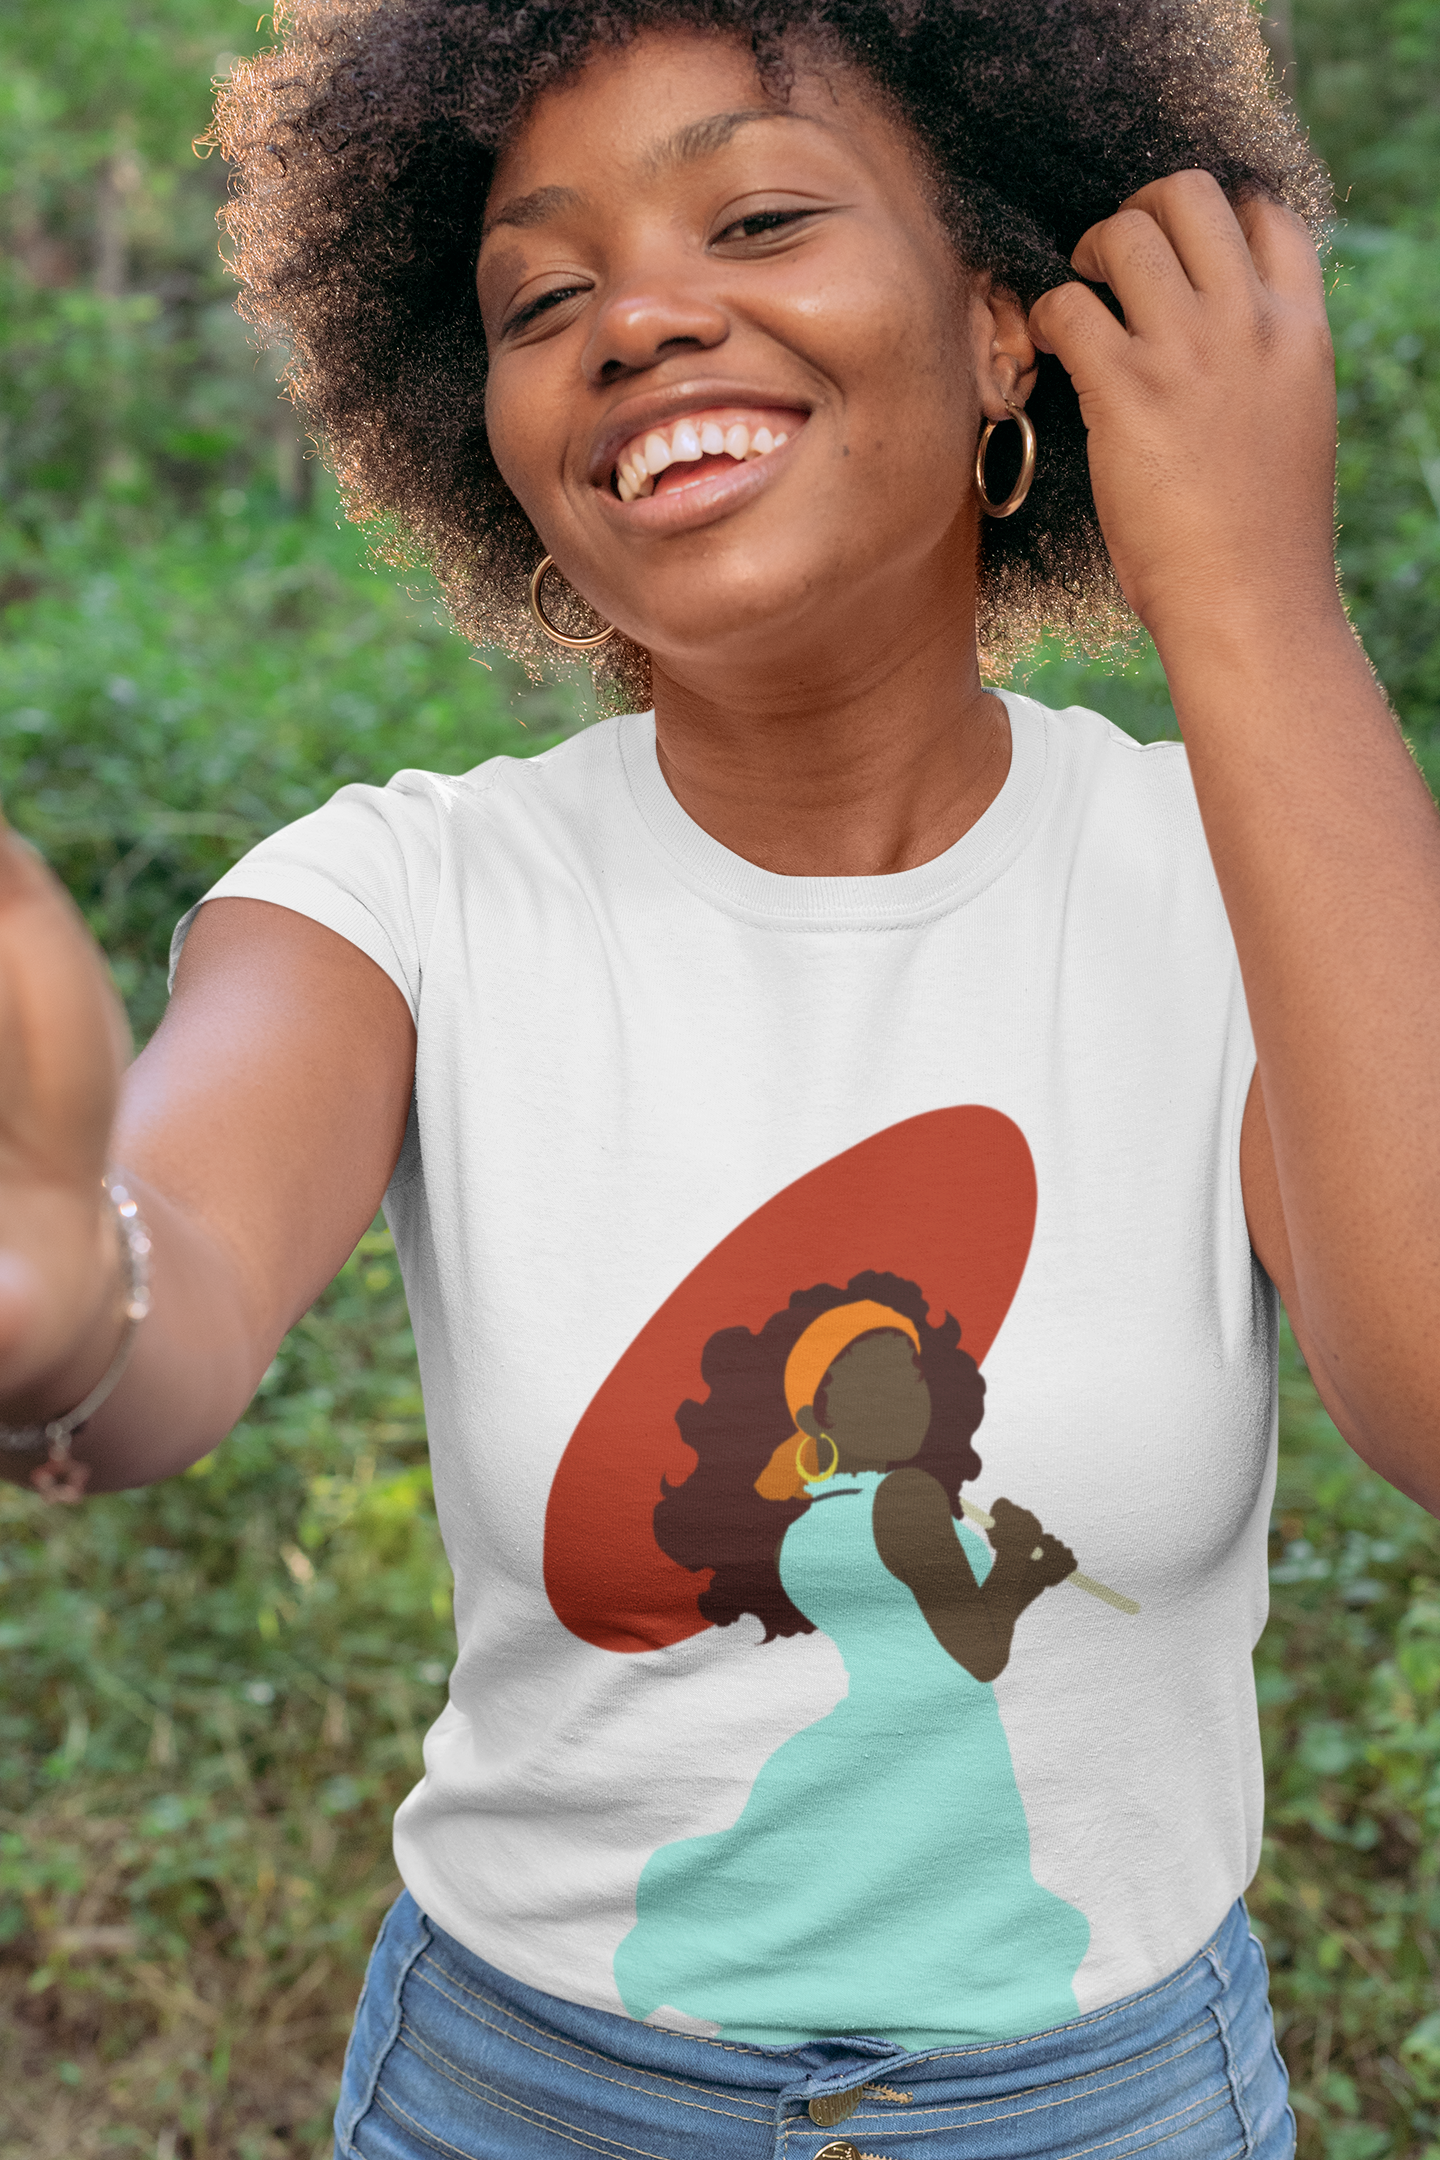 100 African American Culture and African Culture png files for custom shirts, mugs, signs, tote bags, photos, stickers, and gift creation